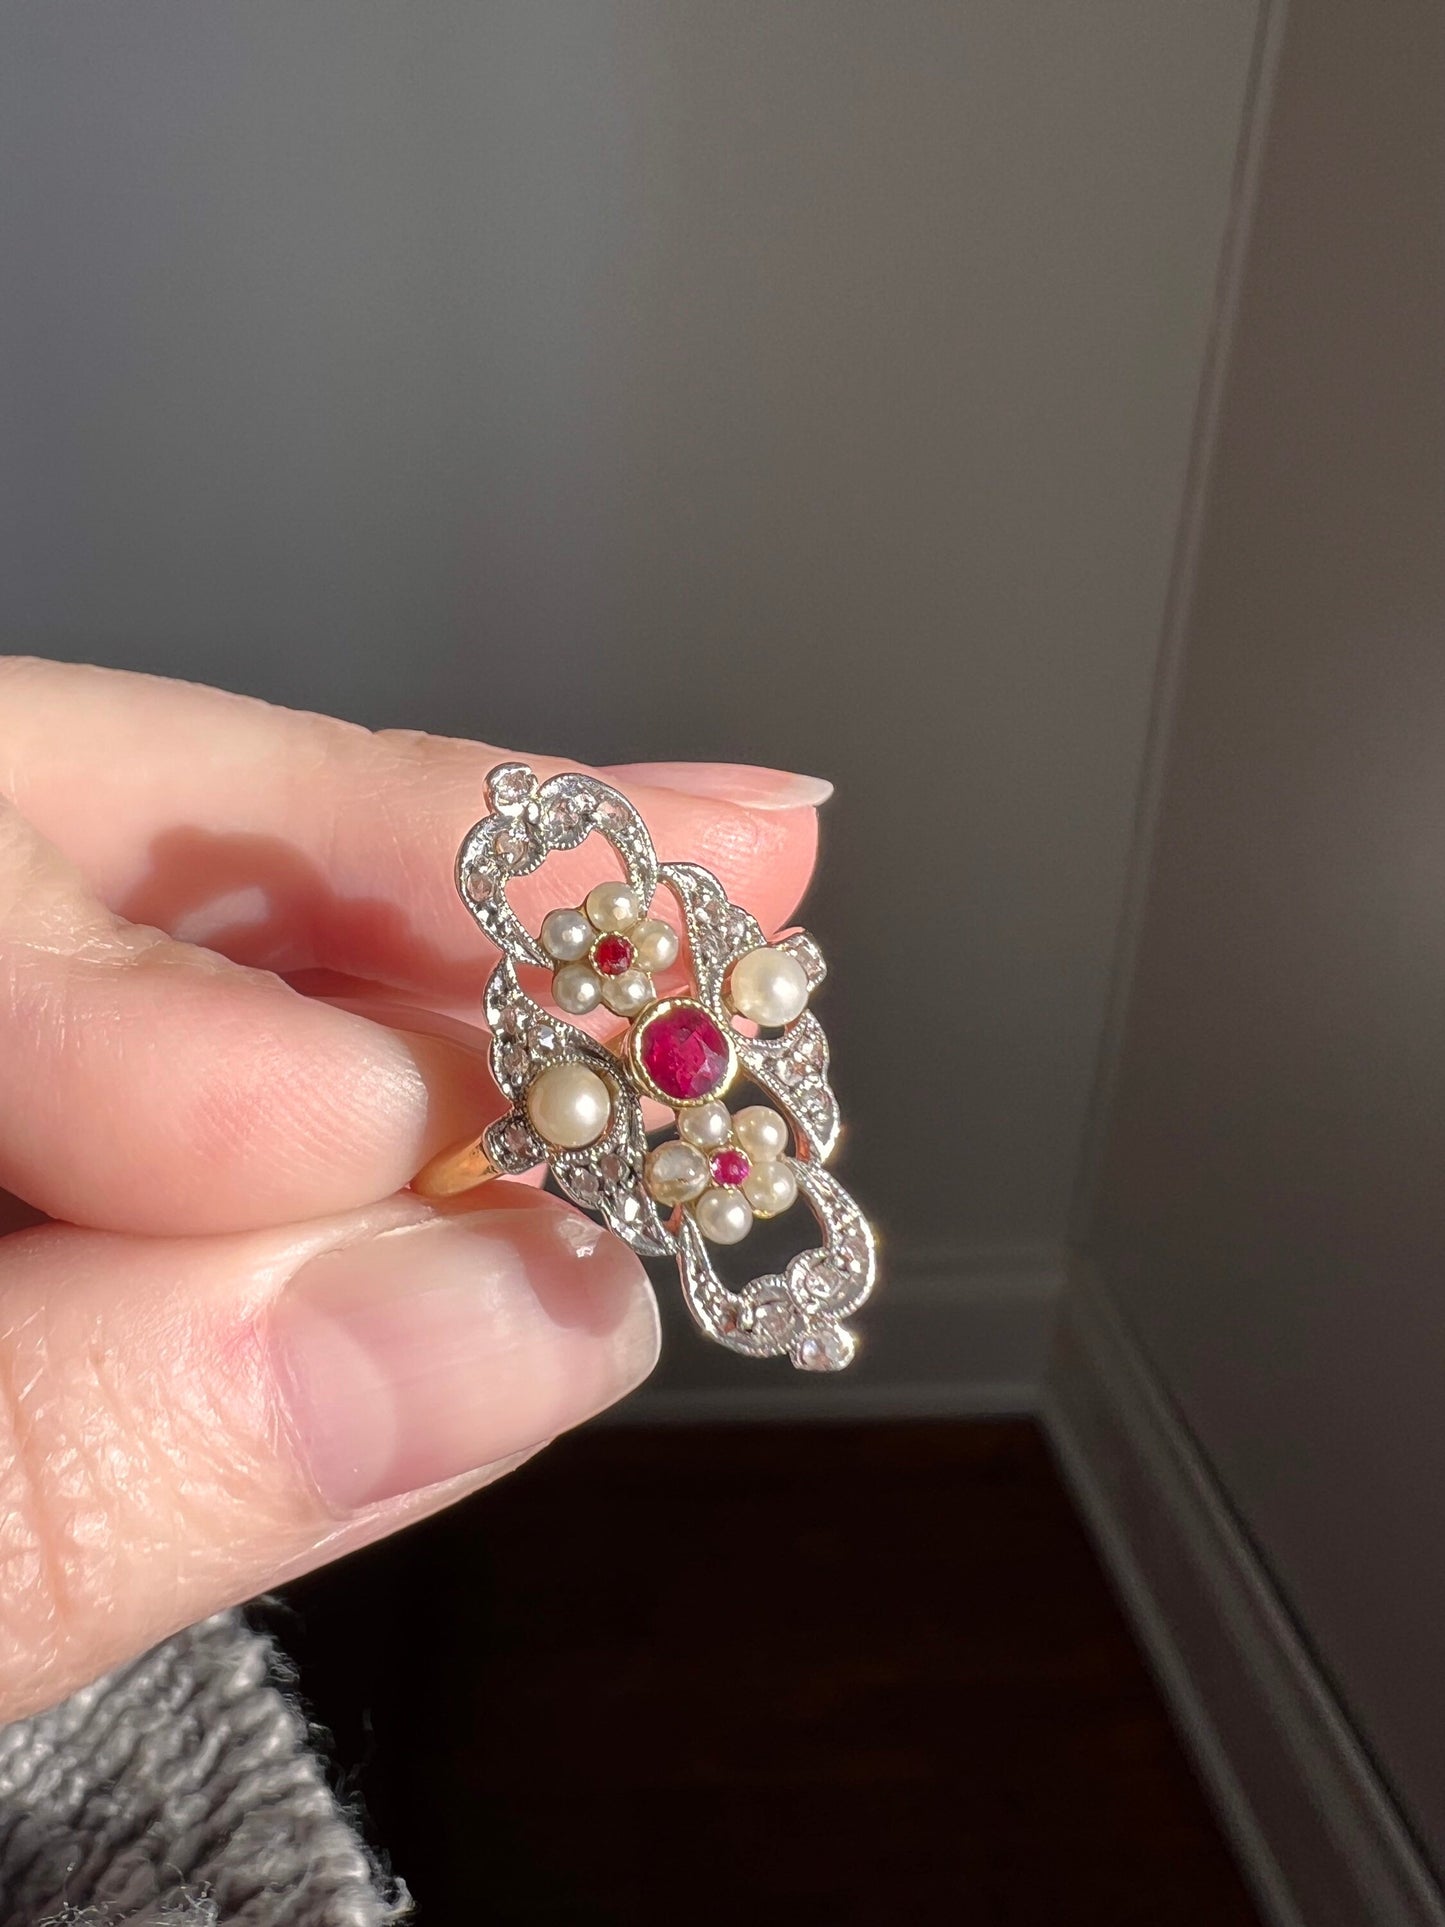 Belle Epoque FRENCH Antique FLORAL Navette Ring RUBY Pearl Flowers Rose Cut DiAMONDS 18k Gold Art Nouveau Victorian Romantic Gift Stacker